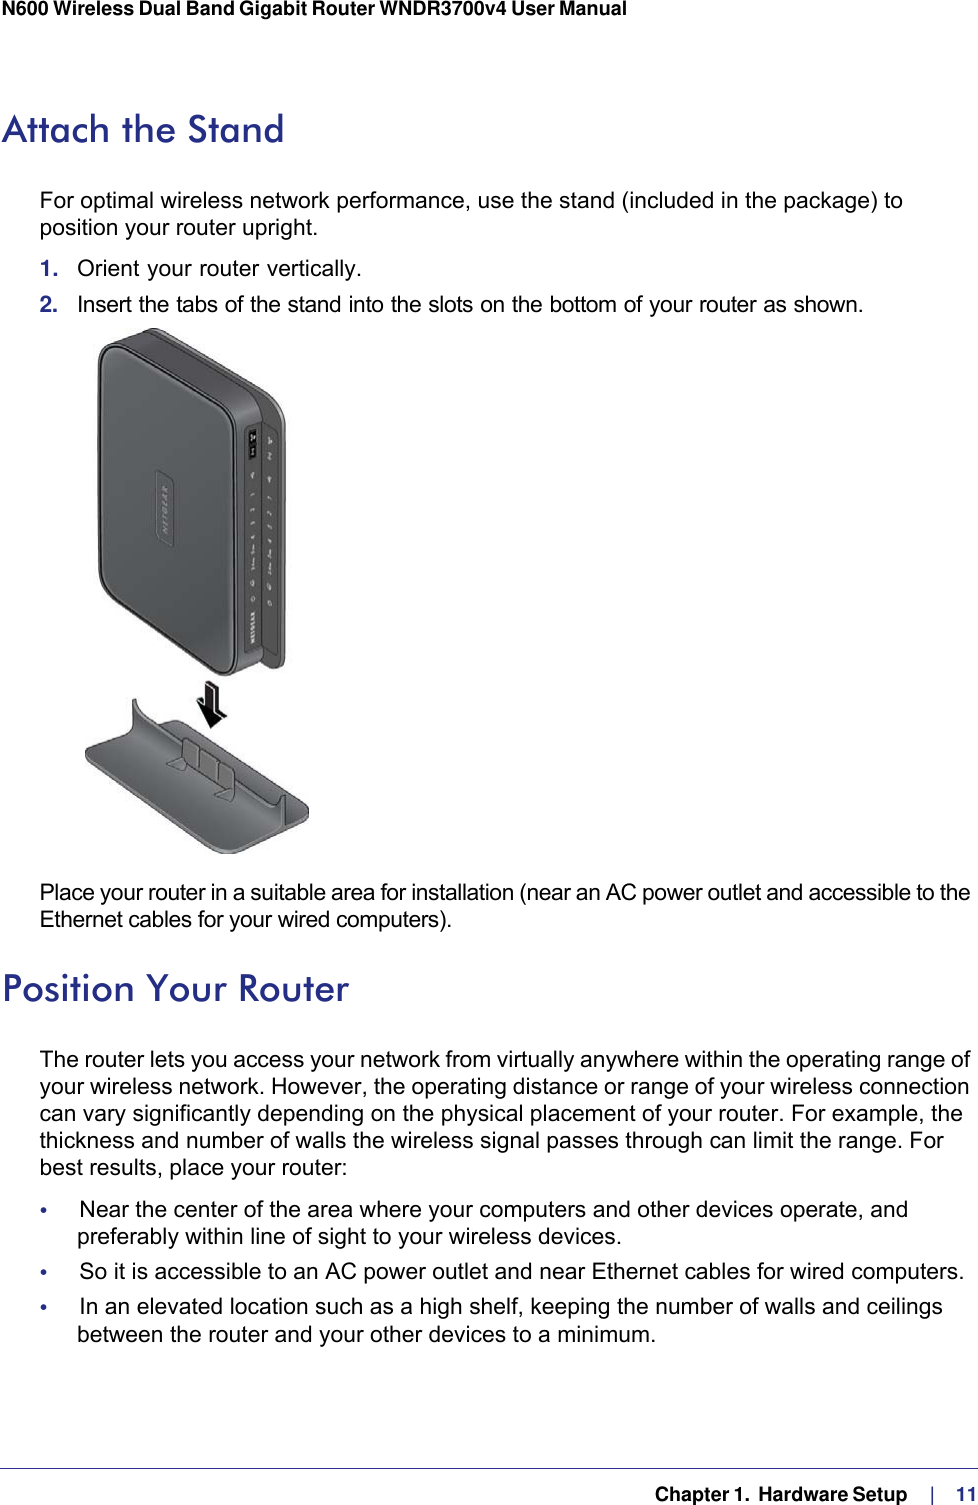   Chapter 1.  Hardware Setup     |    11N600 Wireless Dual Band Gigabit Router WNDR3700v4 User Manual Attach the StandFor optimal wireless network performance, use the stand (included in the package) to position your router upright. 1.  Orient your router vertically.2.  Insert the tabs of the stand into the slots on the bottom of your router as shown. Place your router in a suitable area for installation (near an AC power outlet and accessible to the Ethernet cables for your wired computers). Position Your RouterThe router lets you access your network from virtually anywhere within the operating range of your wireless network. However, the operating distance or range of your wireless connection can vary significantly depending on the physical placement of your router. For example, the thickness and number of walls the wireless signal passes through can limit the range. For best results, place your router: •     Near the center of the area where your computers and other devices operate, and preferably within line of sight to your wireless devices.•     So it is accessible to an AC power outlet and near Ethernet cables for wired computers.•     In an elevated location such as a high shelf, keeping the number of walls and ceilings between the router and your other devices to a minimum.